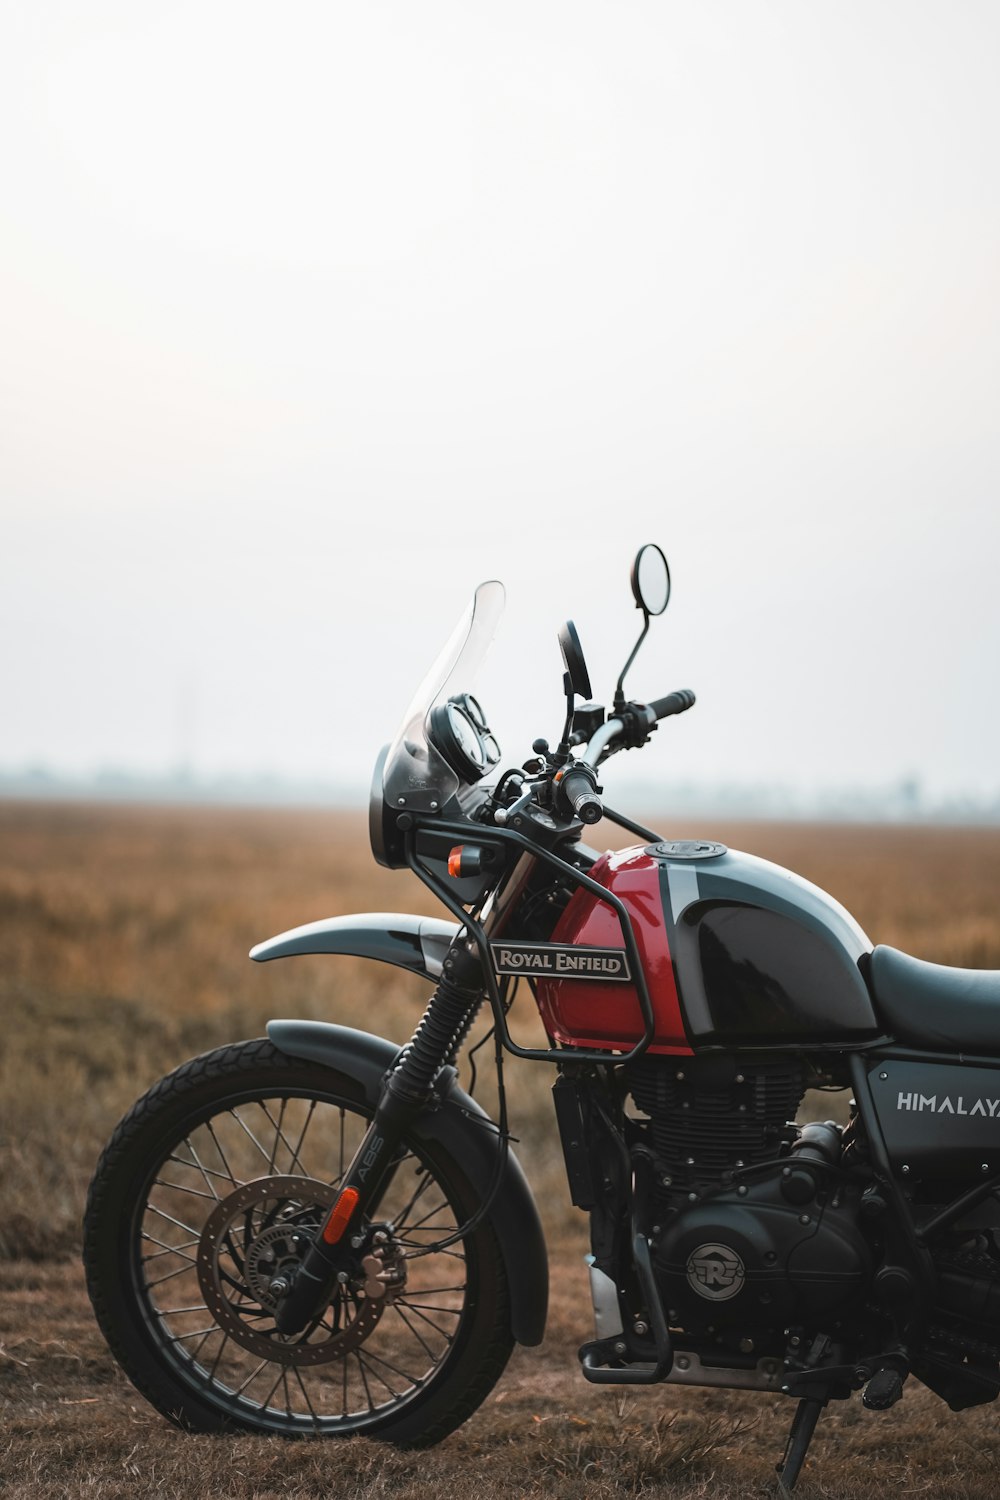 a motorcycle parked on a dirt road in a field